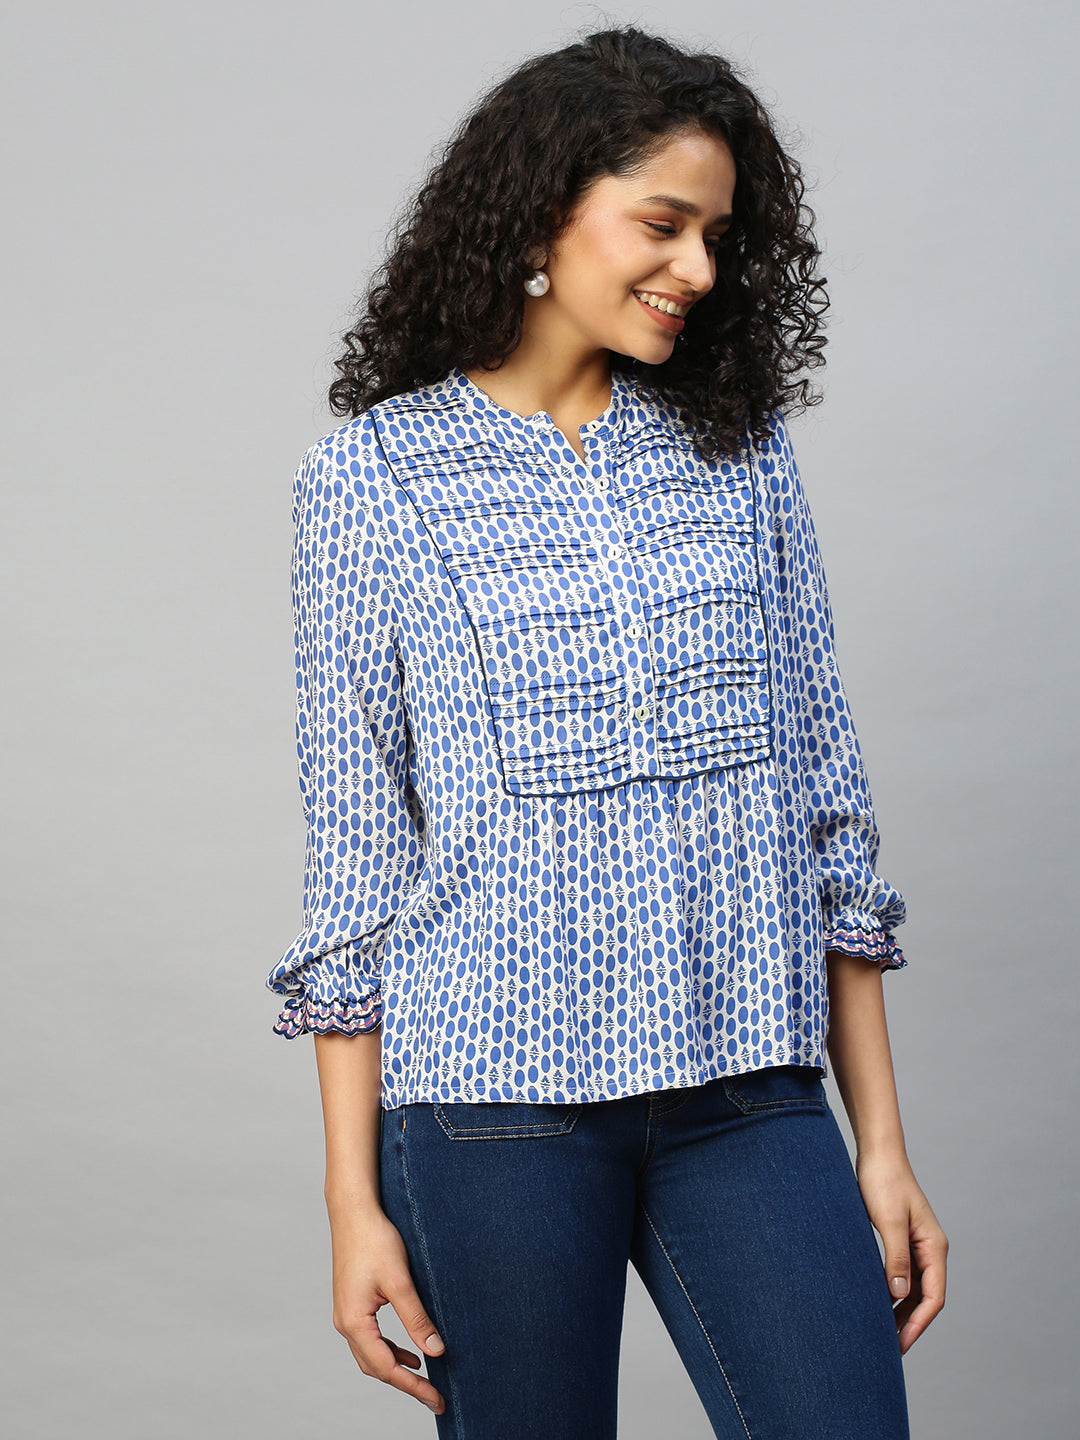 Dot Printed Rayon, Detailed Yoke Tunic Top W Scalloped Embroidered Cuff